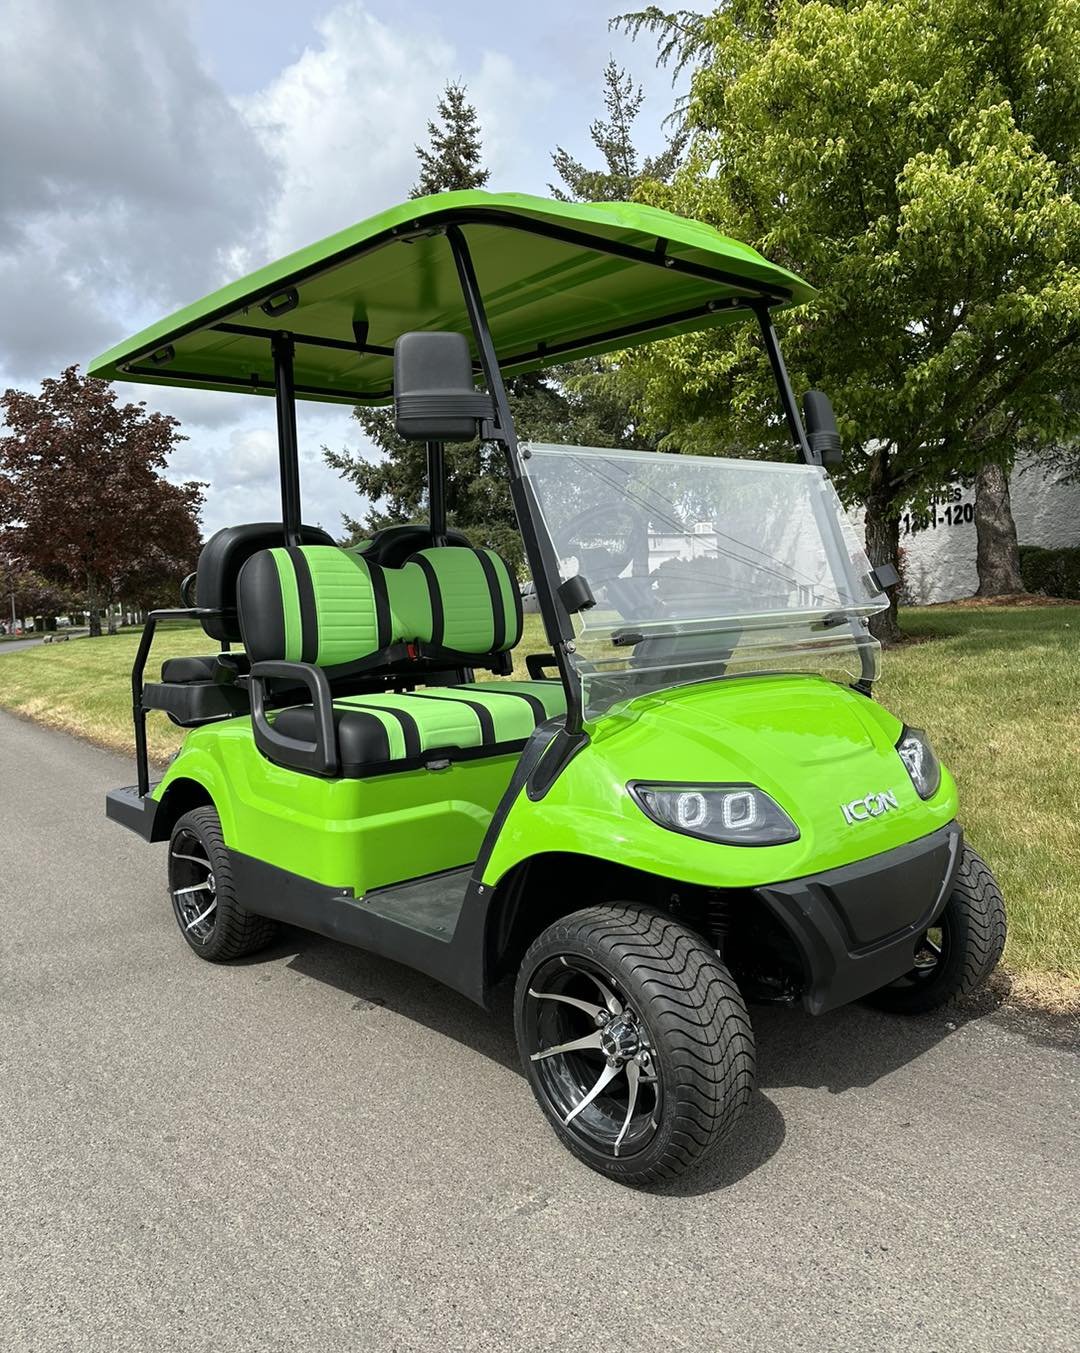 Check out some of our current inventory ready for immediate sale. Special promo financing available through June. No freight charge for all in stock units. Used gas and electric carts also available. Call for inventory.